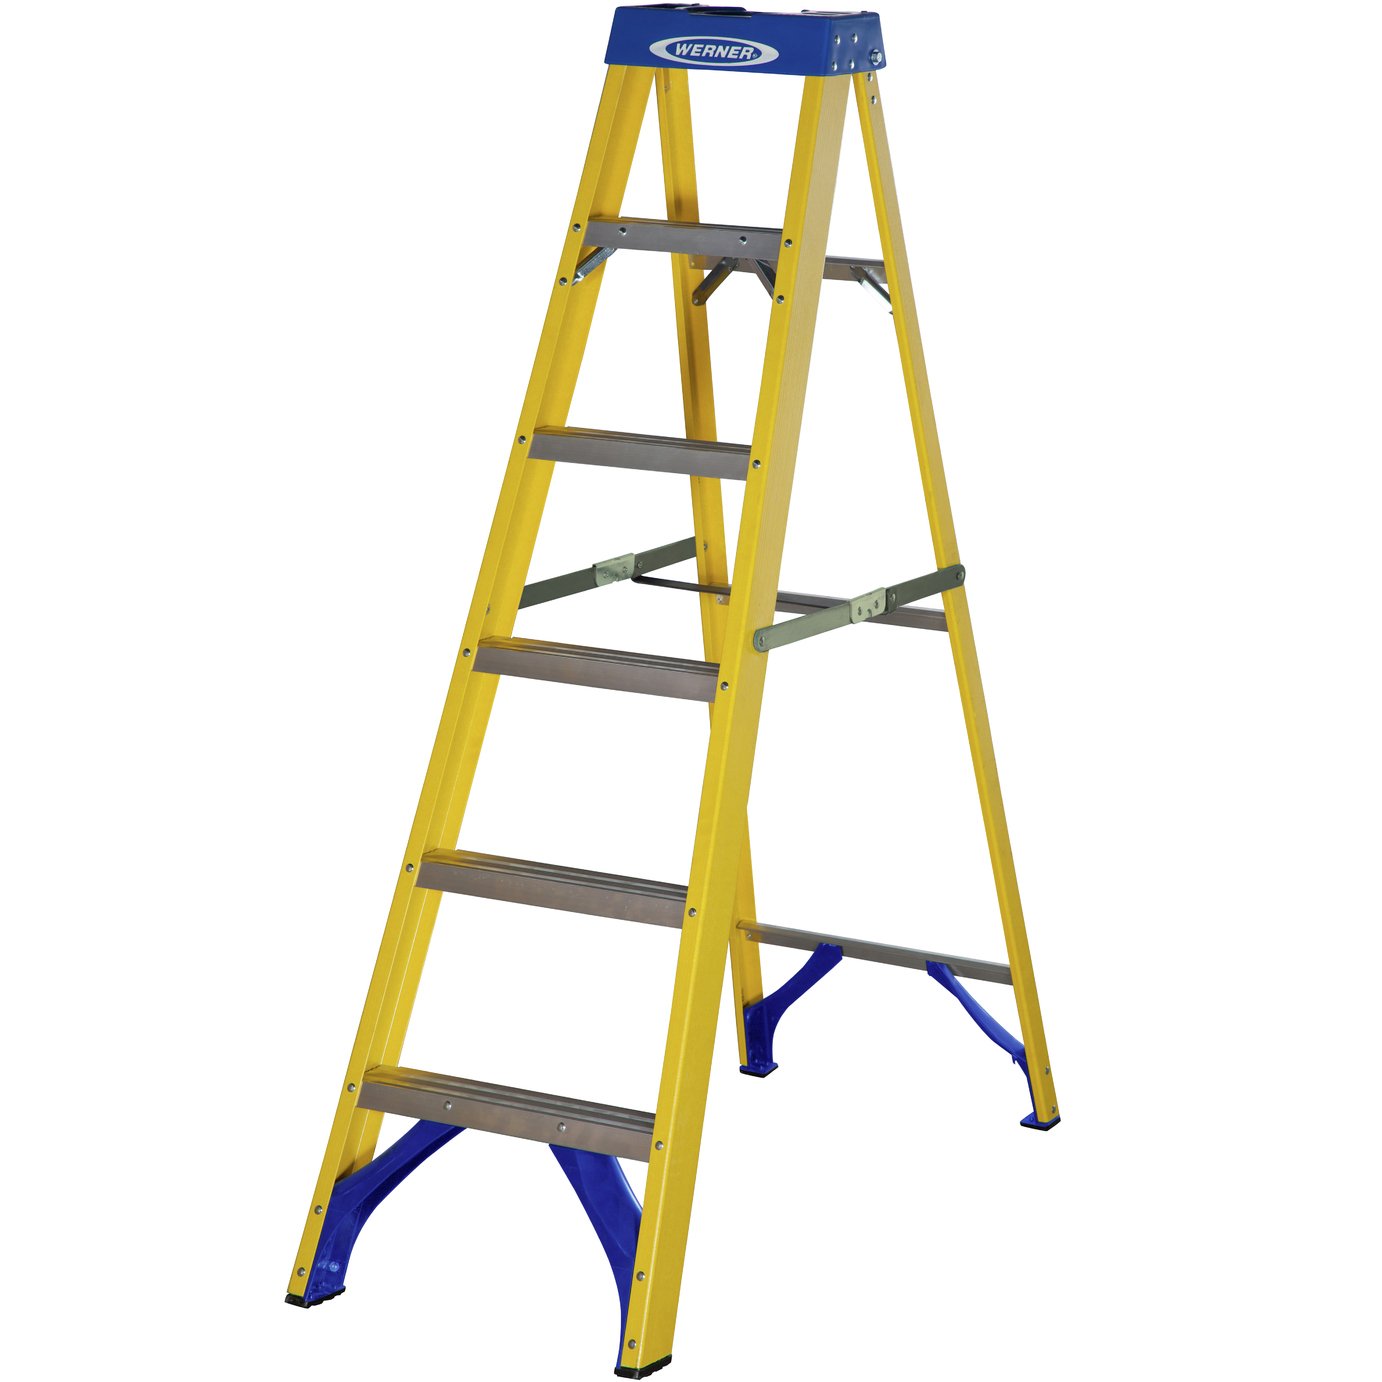 Ladders and Step Stools